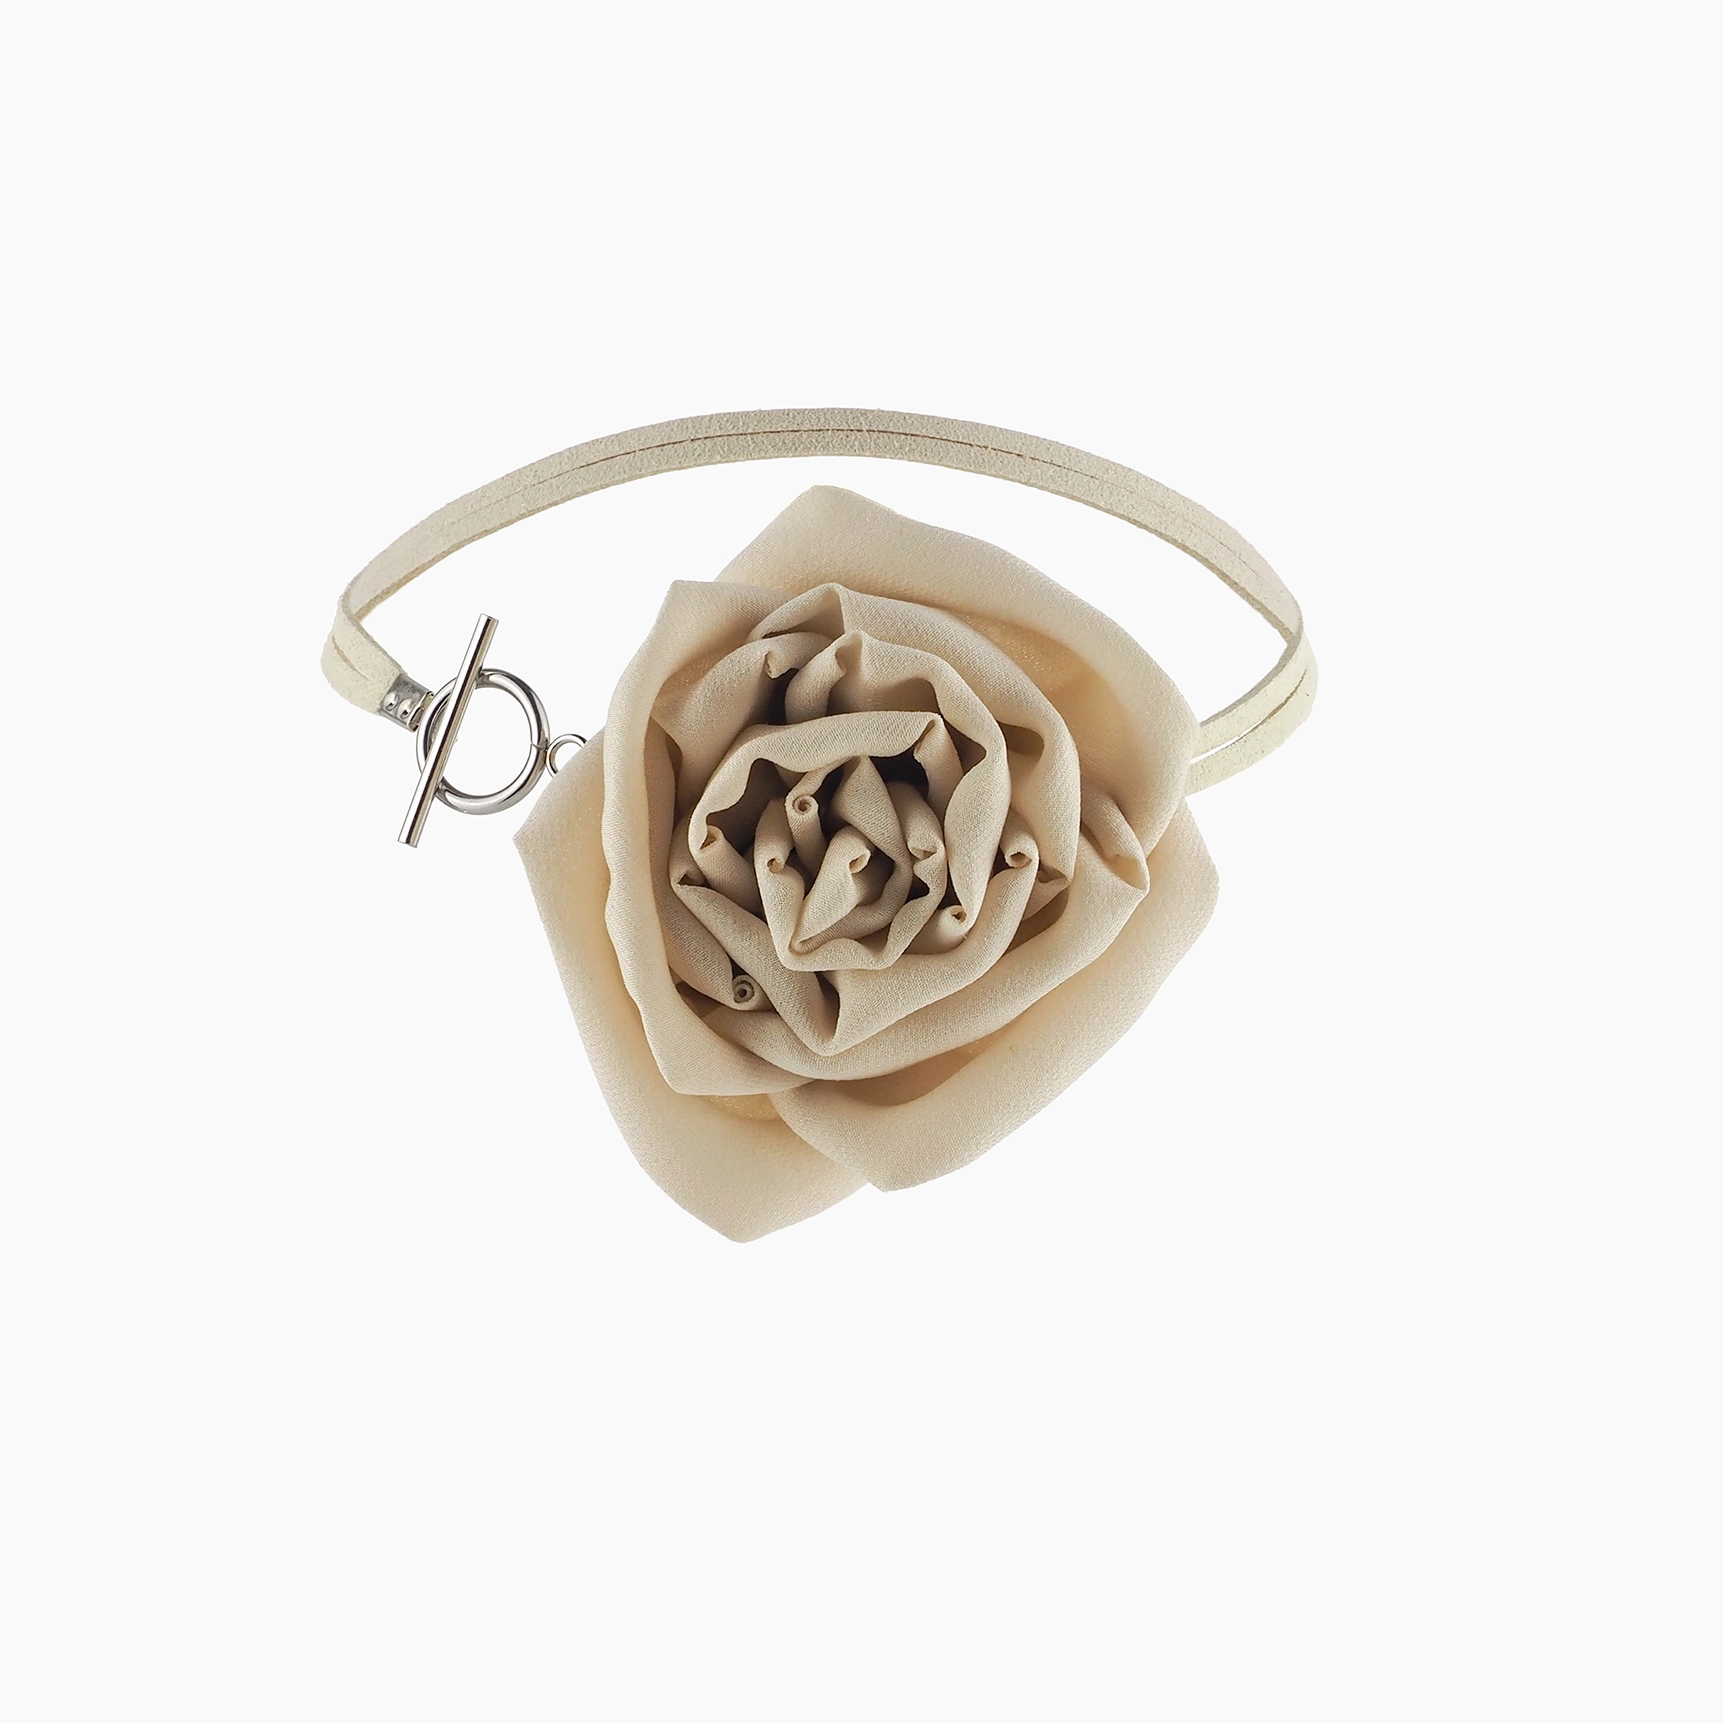 Nude Silk Rose Choker Necklace with Toggle Clasp